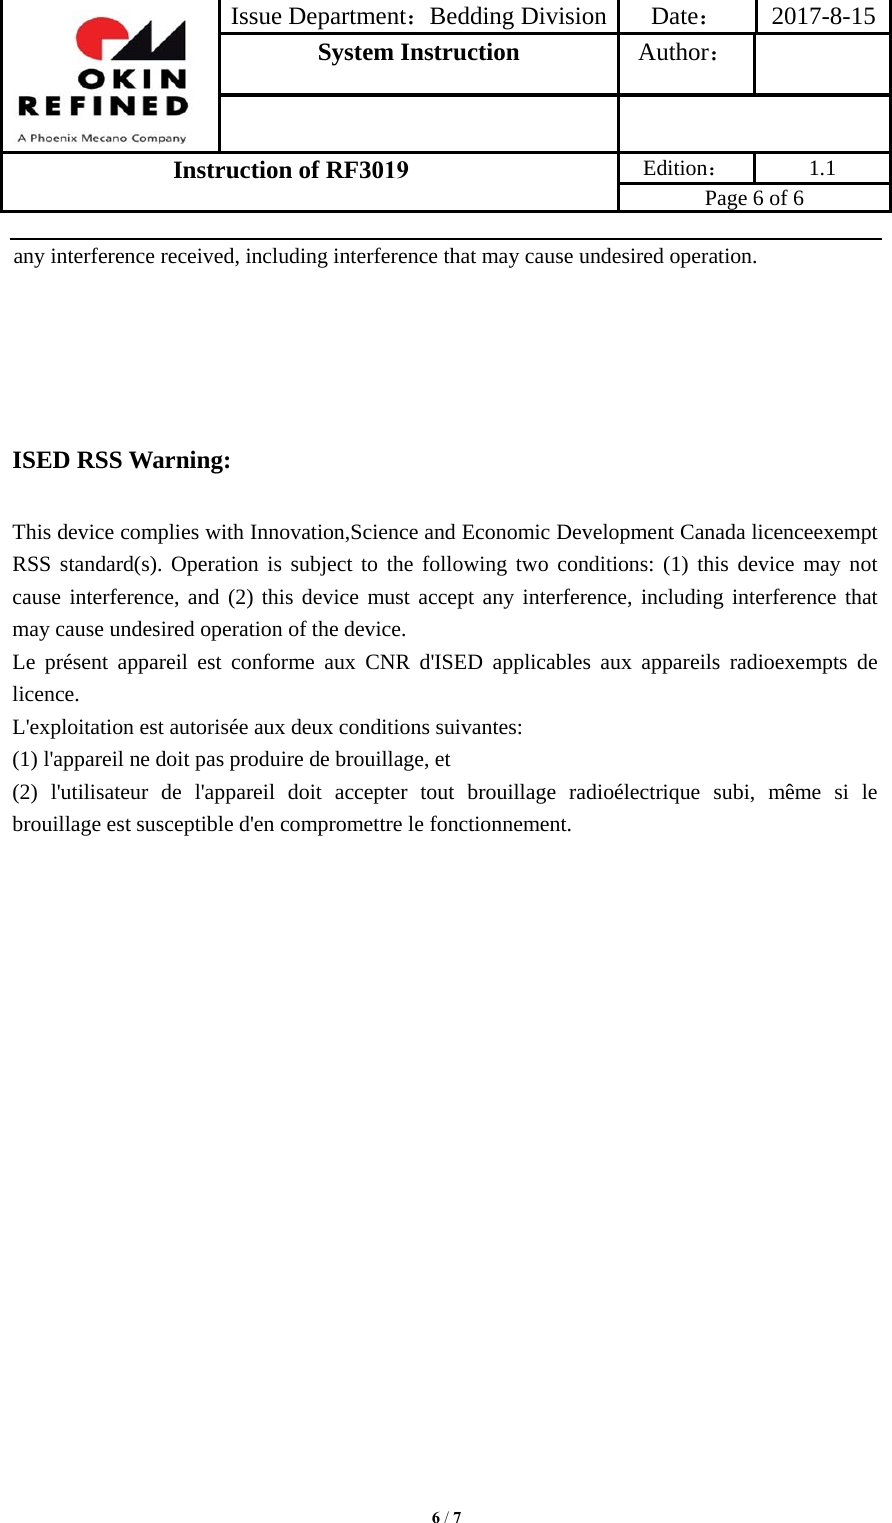 Issue Department：Bedding Division Date： 2017-8-15System Instruction  Author： Instruction of RF3019 Edition： 1.1 Page 6 of 6 6 / 7any interference received, including interference that may cause undesired operation. ISED RSS Warning: This device complies with Innovation,Science and Economic Development Canada licenceexempt RSS standard(s). Operation is subject to the following two conditions: (1) this device may not cause interference, and (2) this device must accept any interference, including interference that may cause undesired operation of the device. Le présent appareil est conforme aux CNR d&apos;ISED applicables aux appareils radioexempts de licence. L&apos;exploitation est autorisée aux deux conditions suivantes: (1) l&apos;appareil ne doit pas produire de brouillage, et (2) l&apos;utilisateur de l&apos;appareil doit accepter tout brouillage radioélectrique subi, même si le brouillage est susceptible d&apos;en compromettre le fonctionnement. 